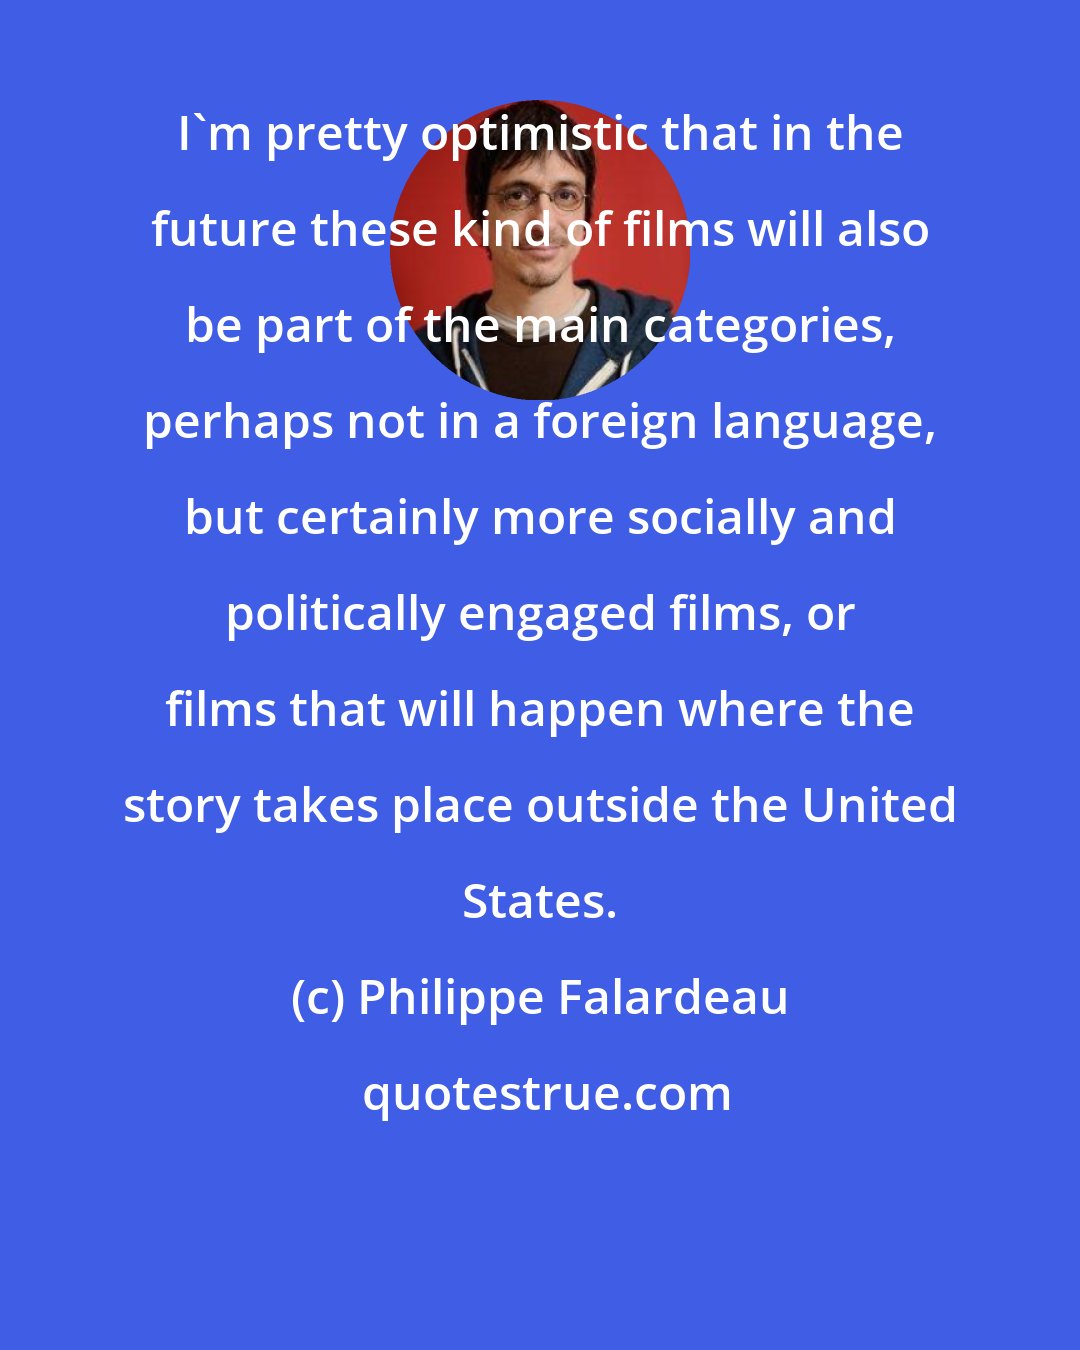 Philippe Falardeau: I'm pretty optimistic that in the future these kind of films will also be part of the main categories, perhaps not in a foreign language, but certainly more socially and politically engaged films, or films that will happen where the story takes place outside the United States.